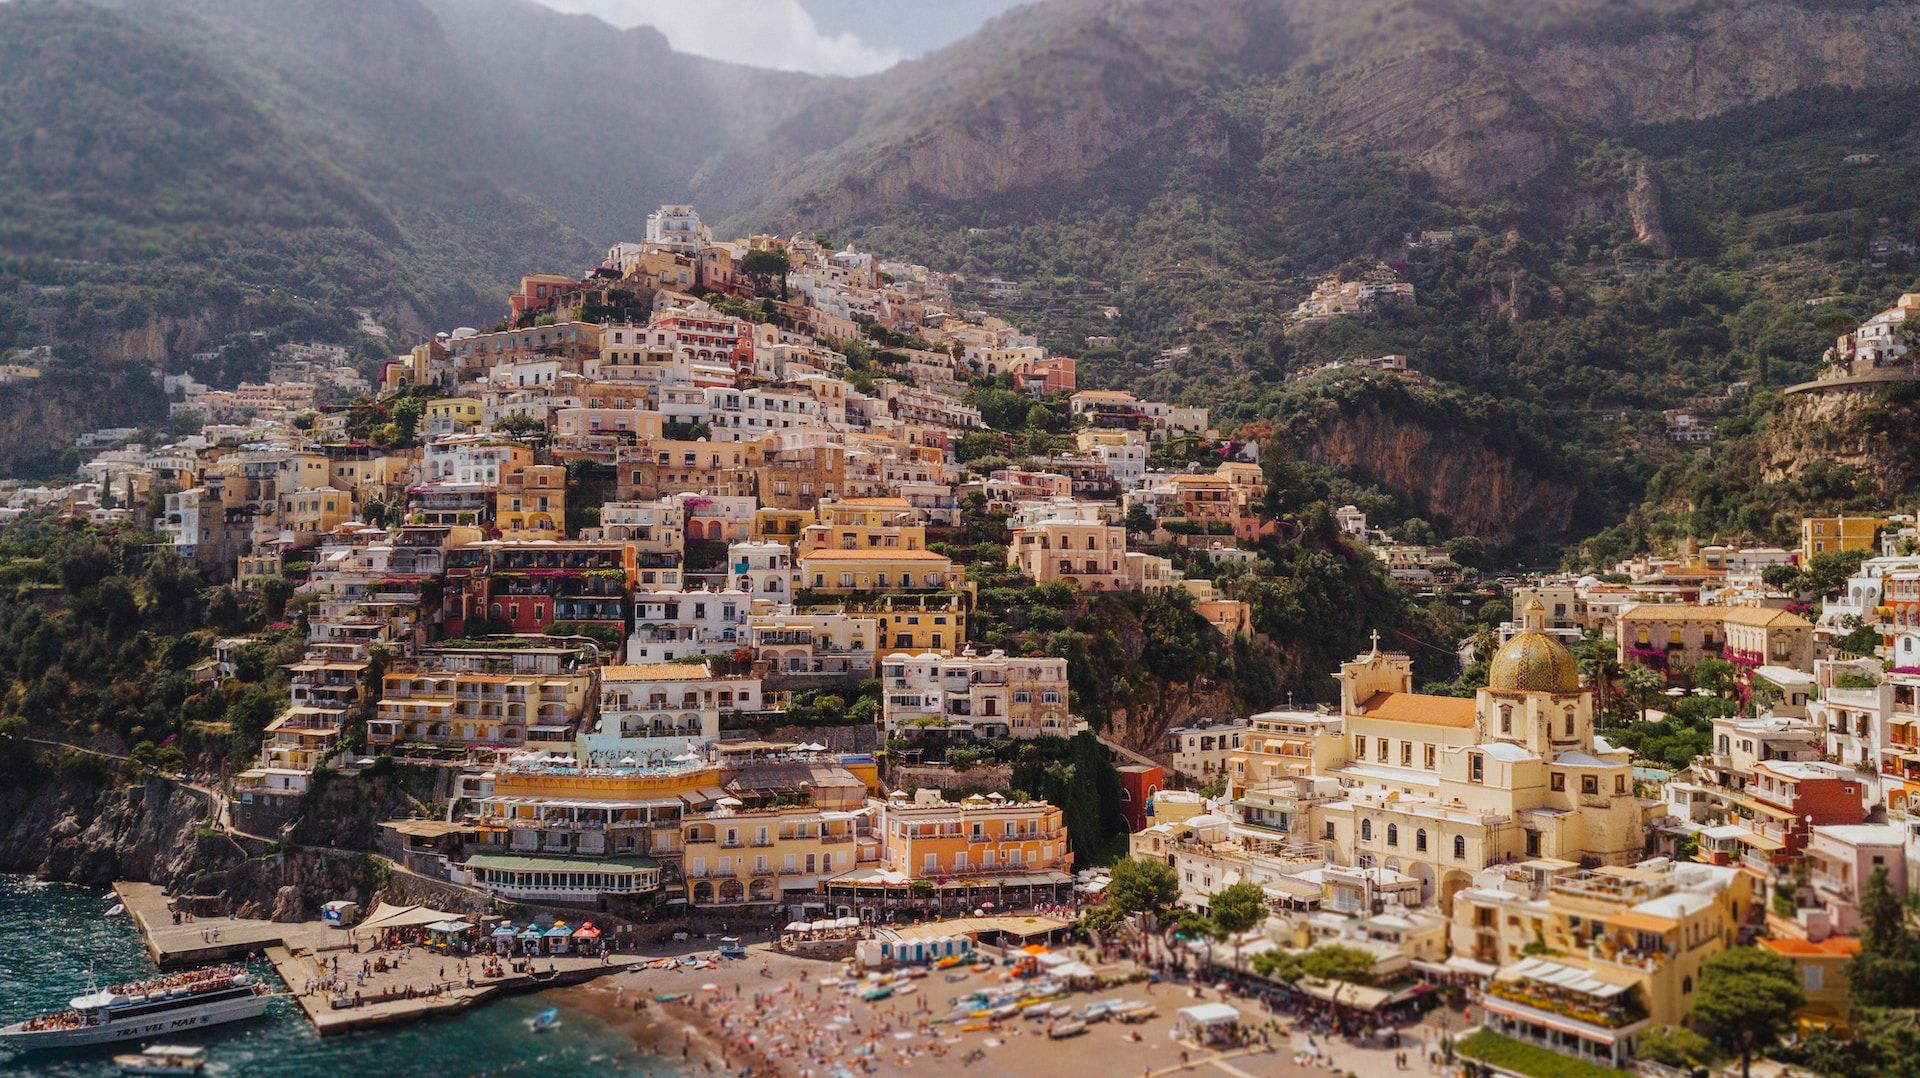 Aerial view of Positano